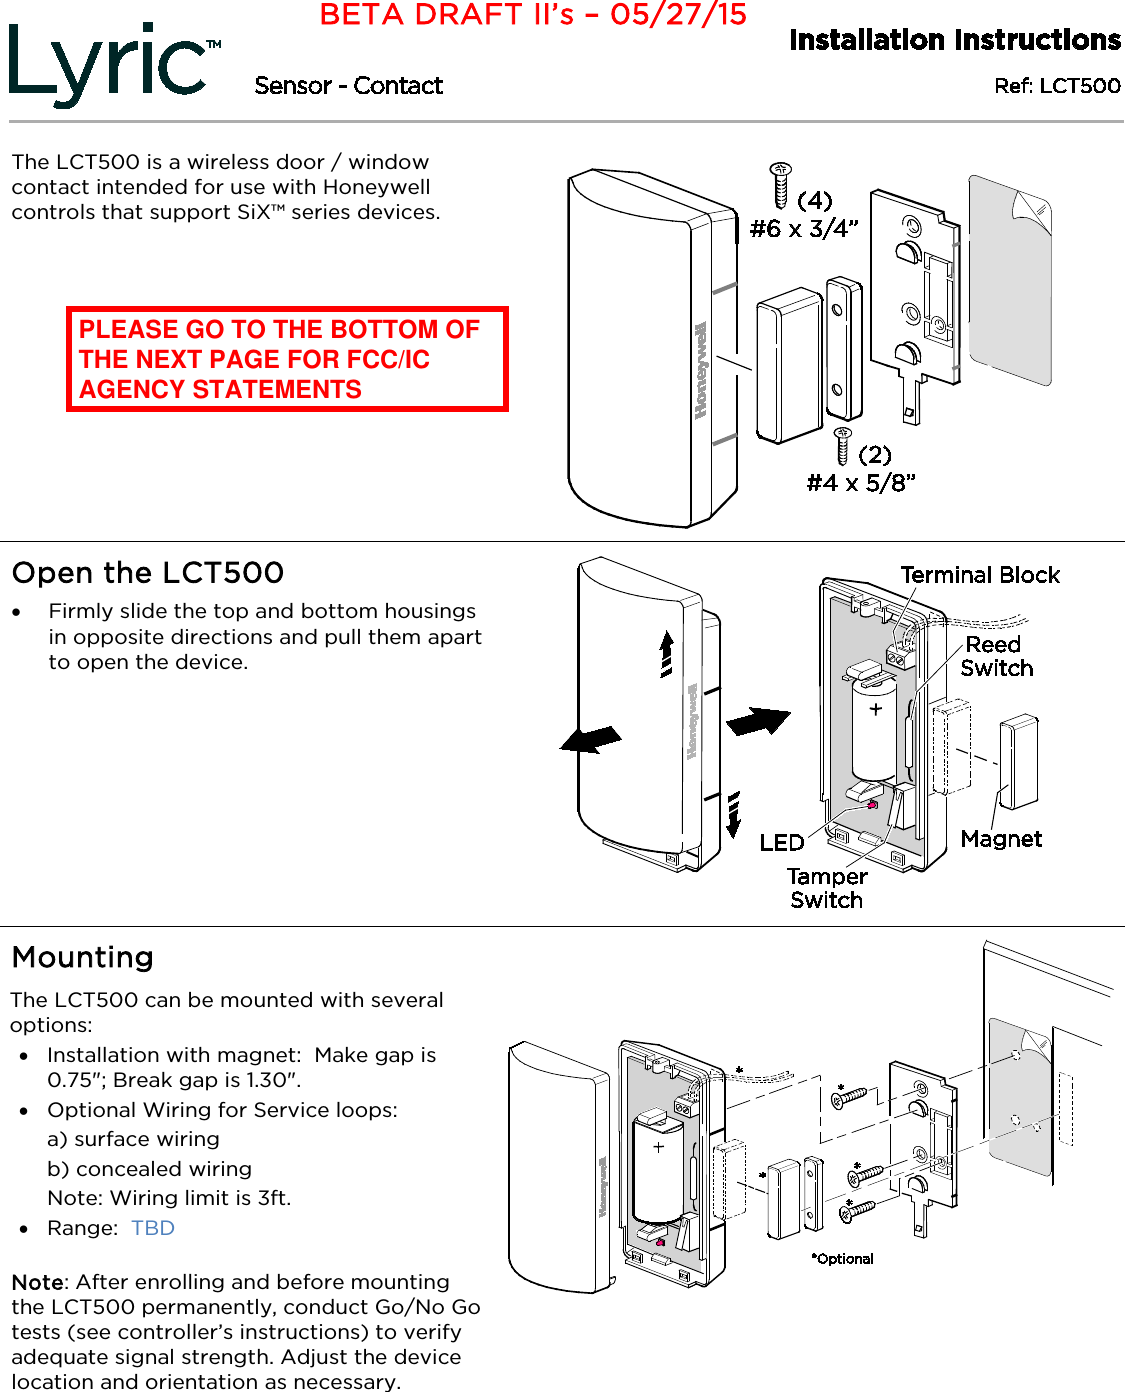     The LCT500 is a wireless door / window contact intended for use with Honeywell controls that support SiX™ series devices.    Open the LCT500  • Firmly slide the top and bottom housings in opposite directions and pull them apart to open the device.     Mounting  The LCT500 can be mounted with several options: • Installation with magnet:  Make gap is 0.75&quot;; Break gap is 1.30&quot;. • Optional Wiring for Service loops:  a) surface wiring b) concealed wiring Note: Wiring limit is 3ft. • Range:  TBD   Note: After enrolling and before mounting the LCT500 permanently, conduct Go/No Go tests (see controller’s instructions) to verify adequate signal strength. Adjust the device location and orientation as necessary.   BETA DRAFT II’s – 05/27/15 PLEASE GO TO THE BOTTOM OF THE NEXT PAGE FOR FCC/IC AGENCY STATEMENTS